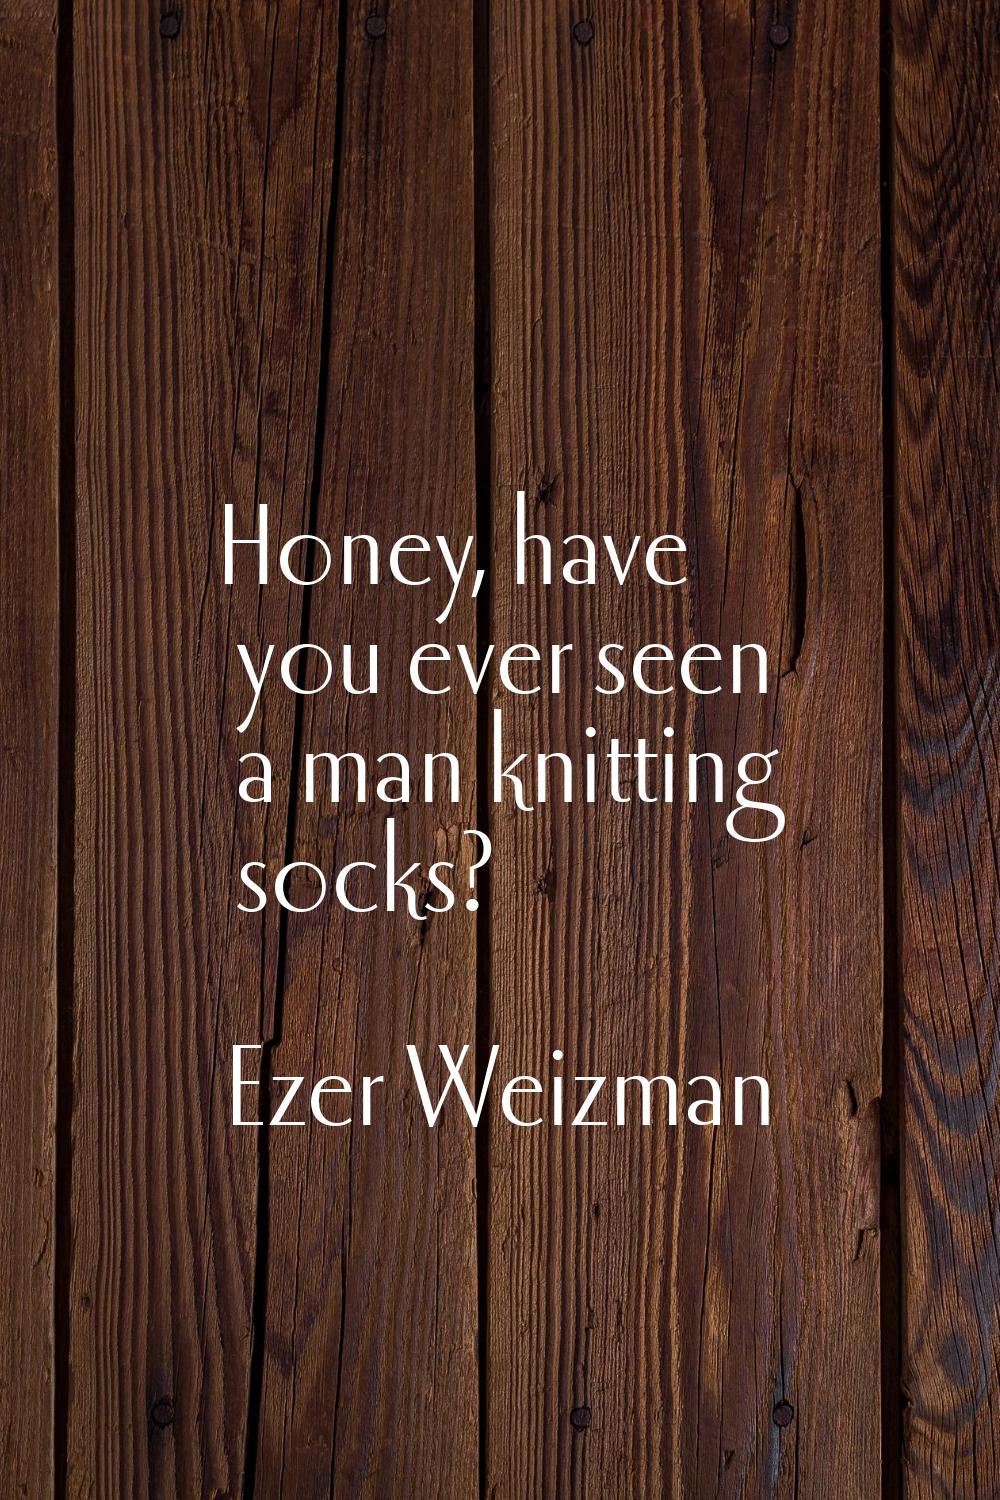 Honey, have you ever seen a man knitting socks?